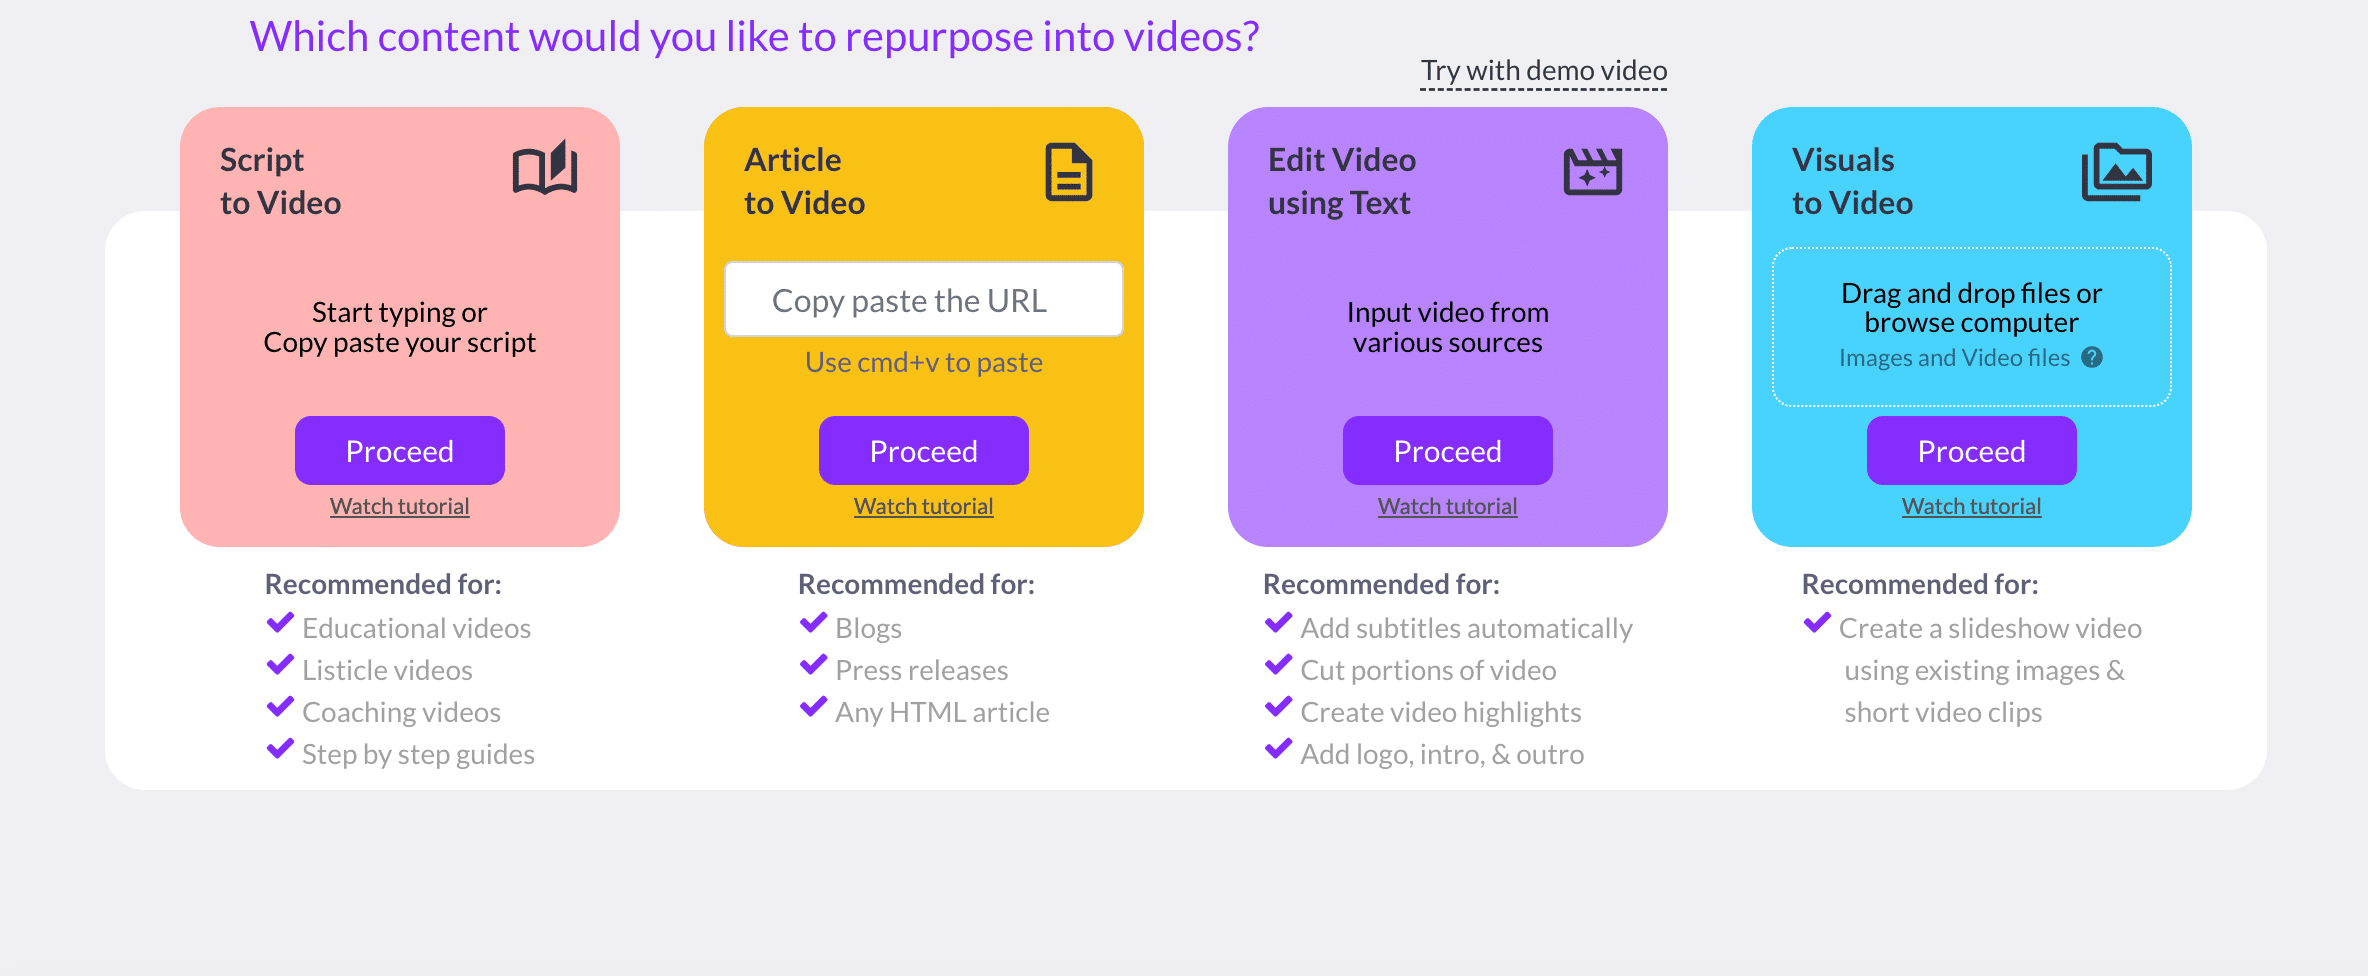 Impressive edits and simplified editing with Pictory, you can make videos using any of the four options.